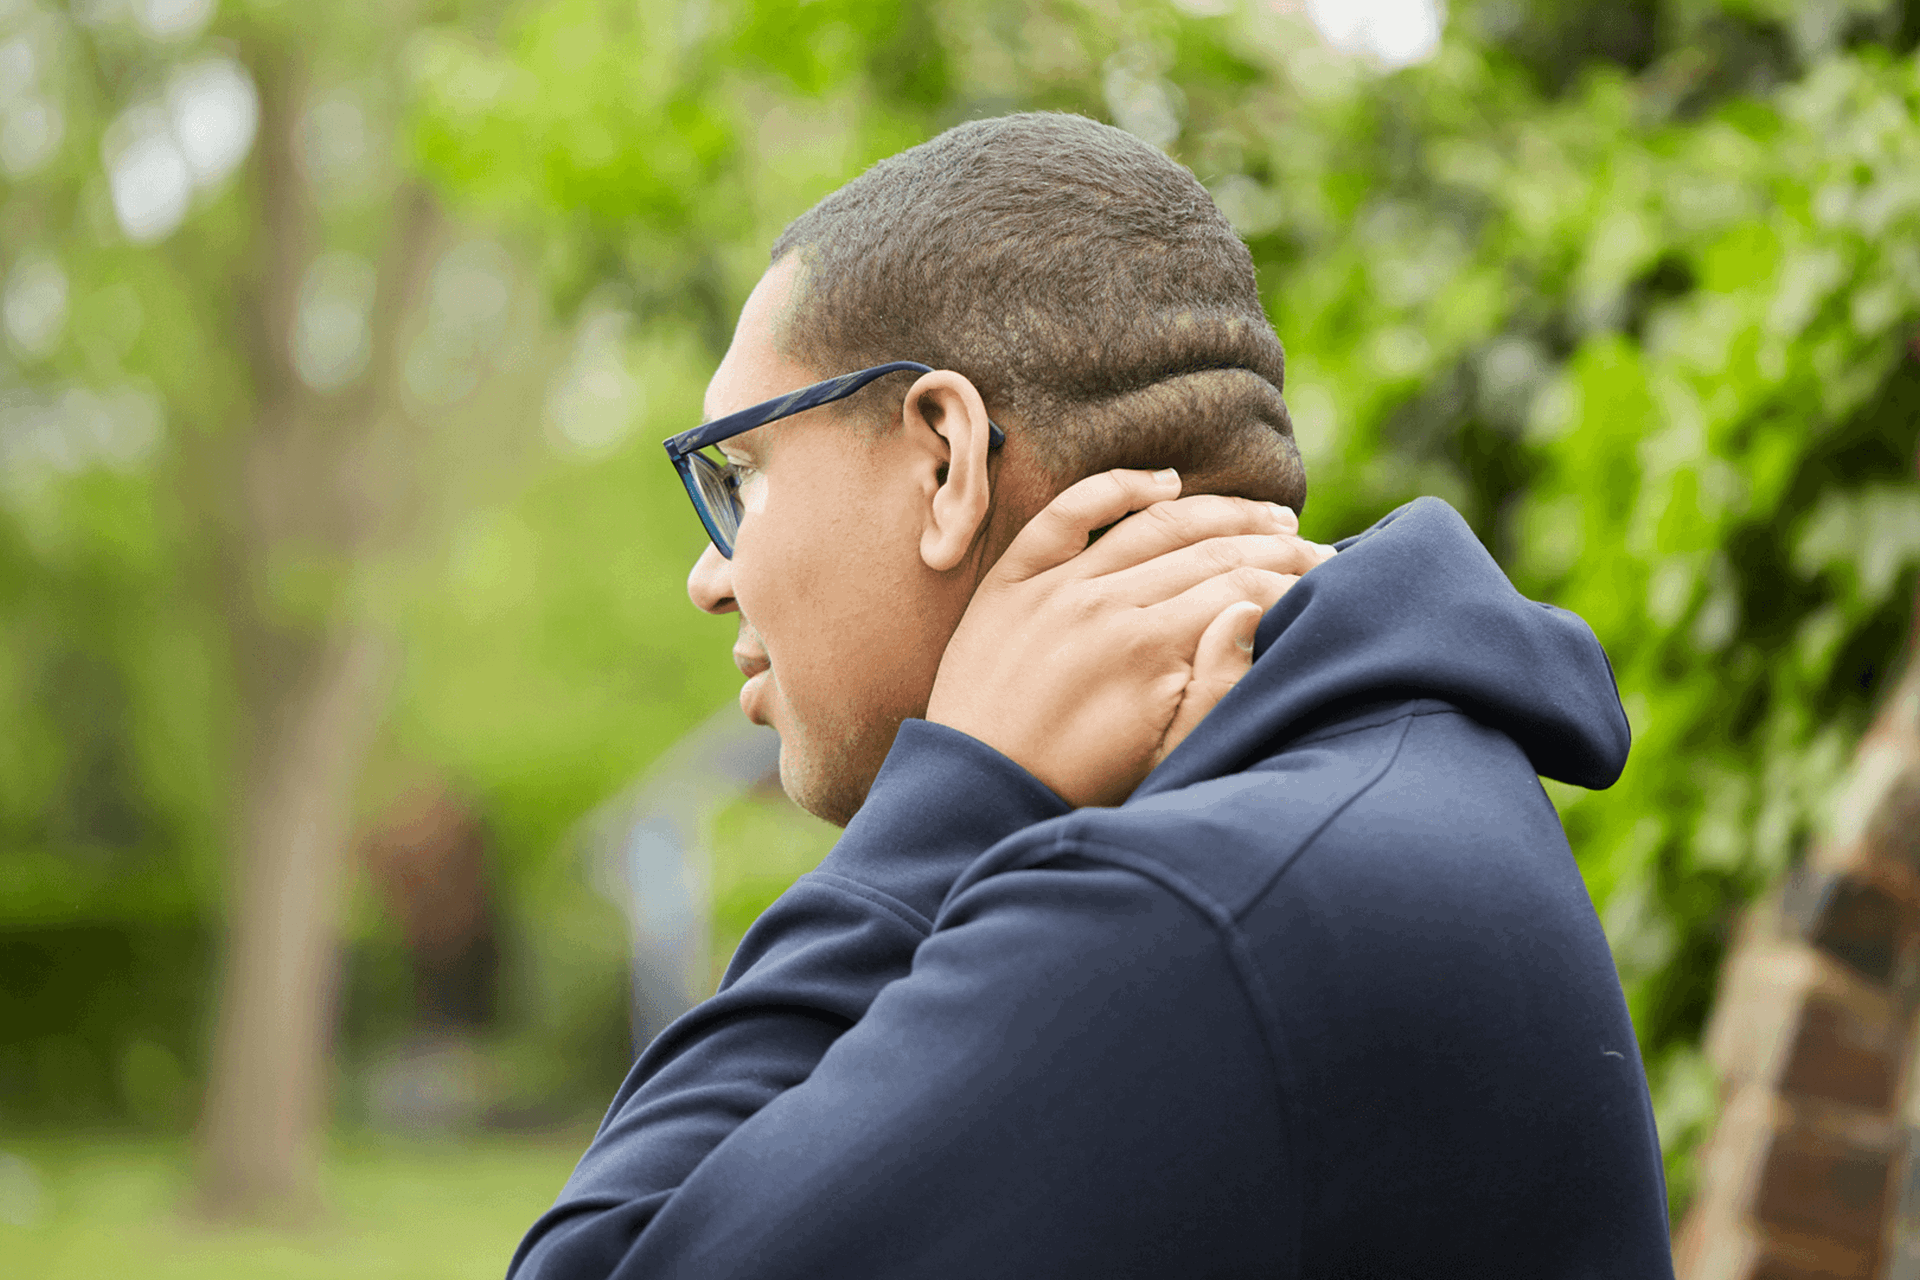 A boy wearing glasses and a black hoodie stands in a park looking worried. He is rubbing the back of his neck with one hand.